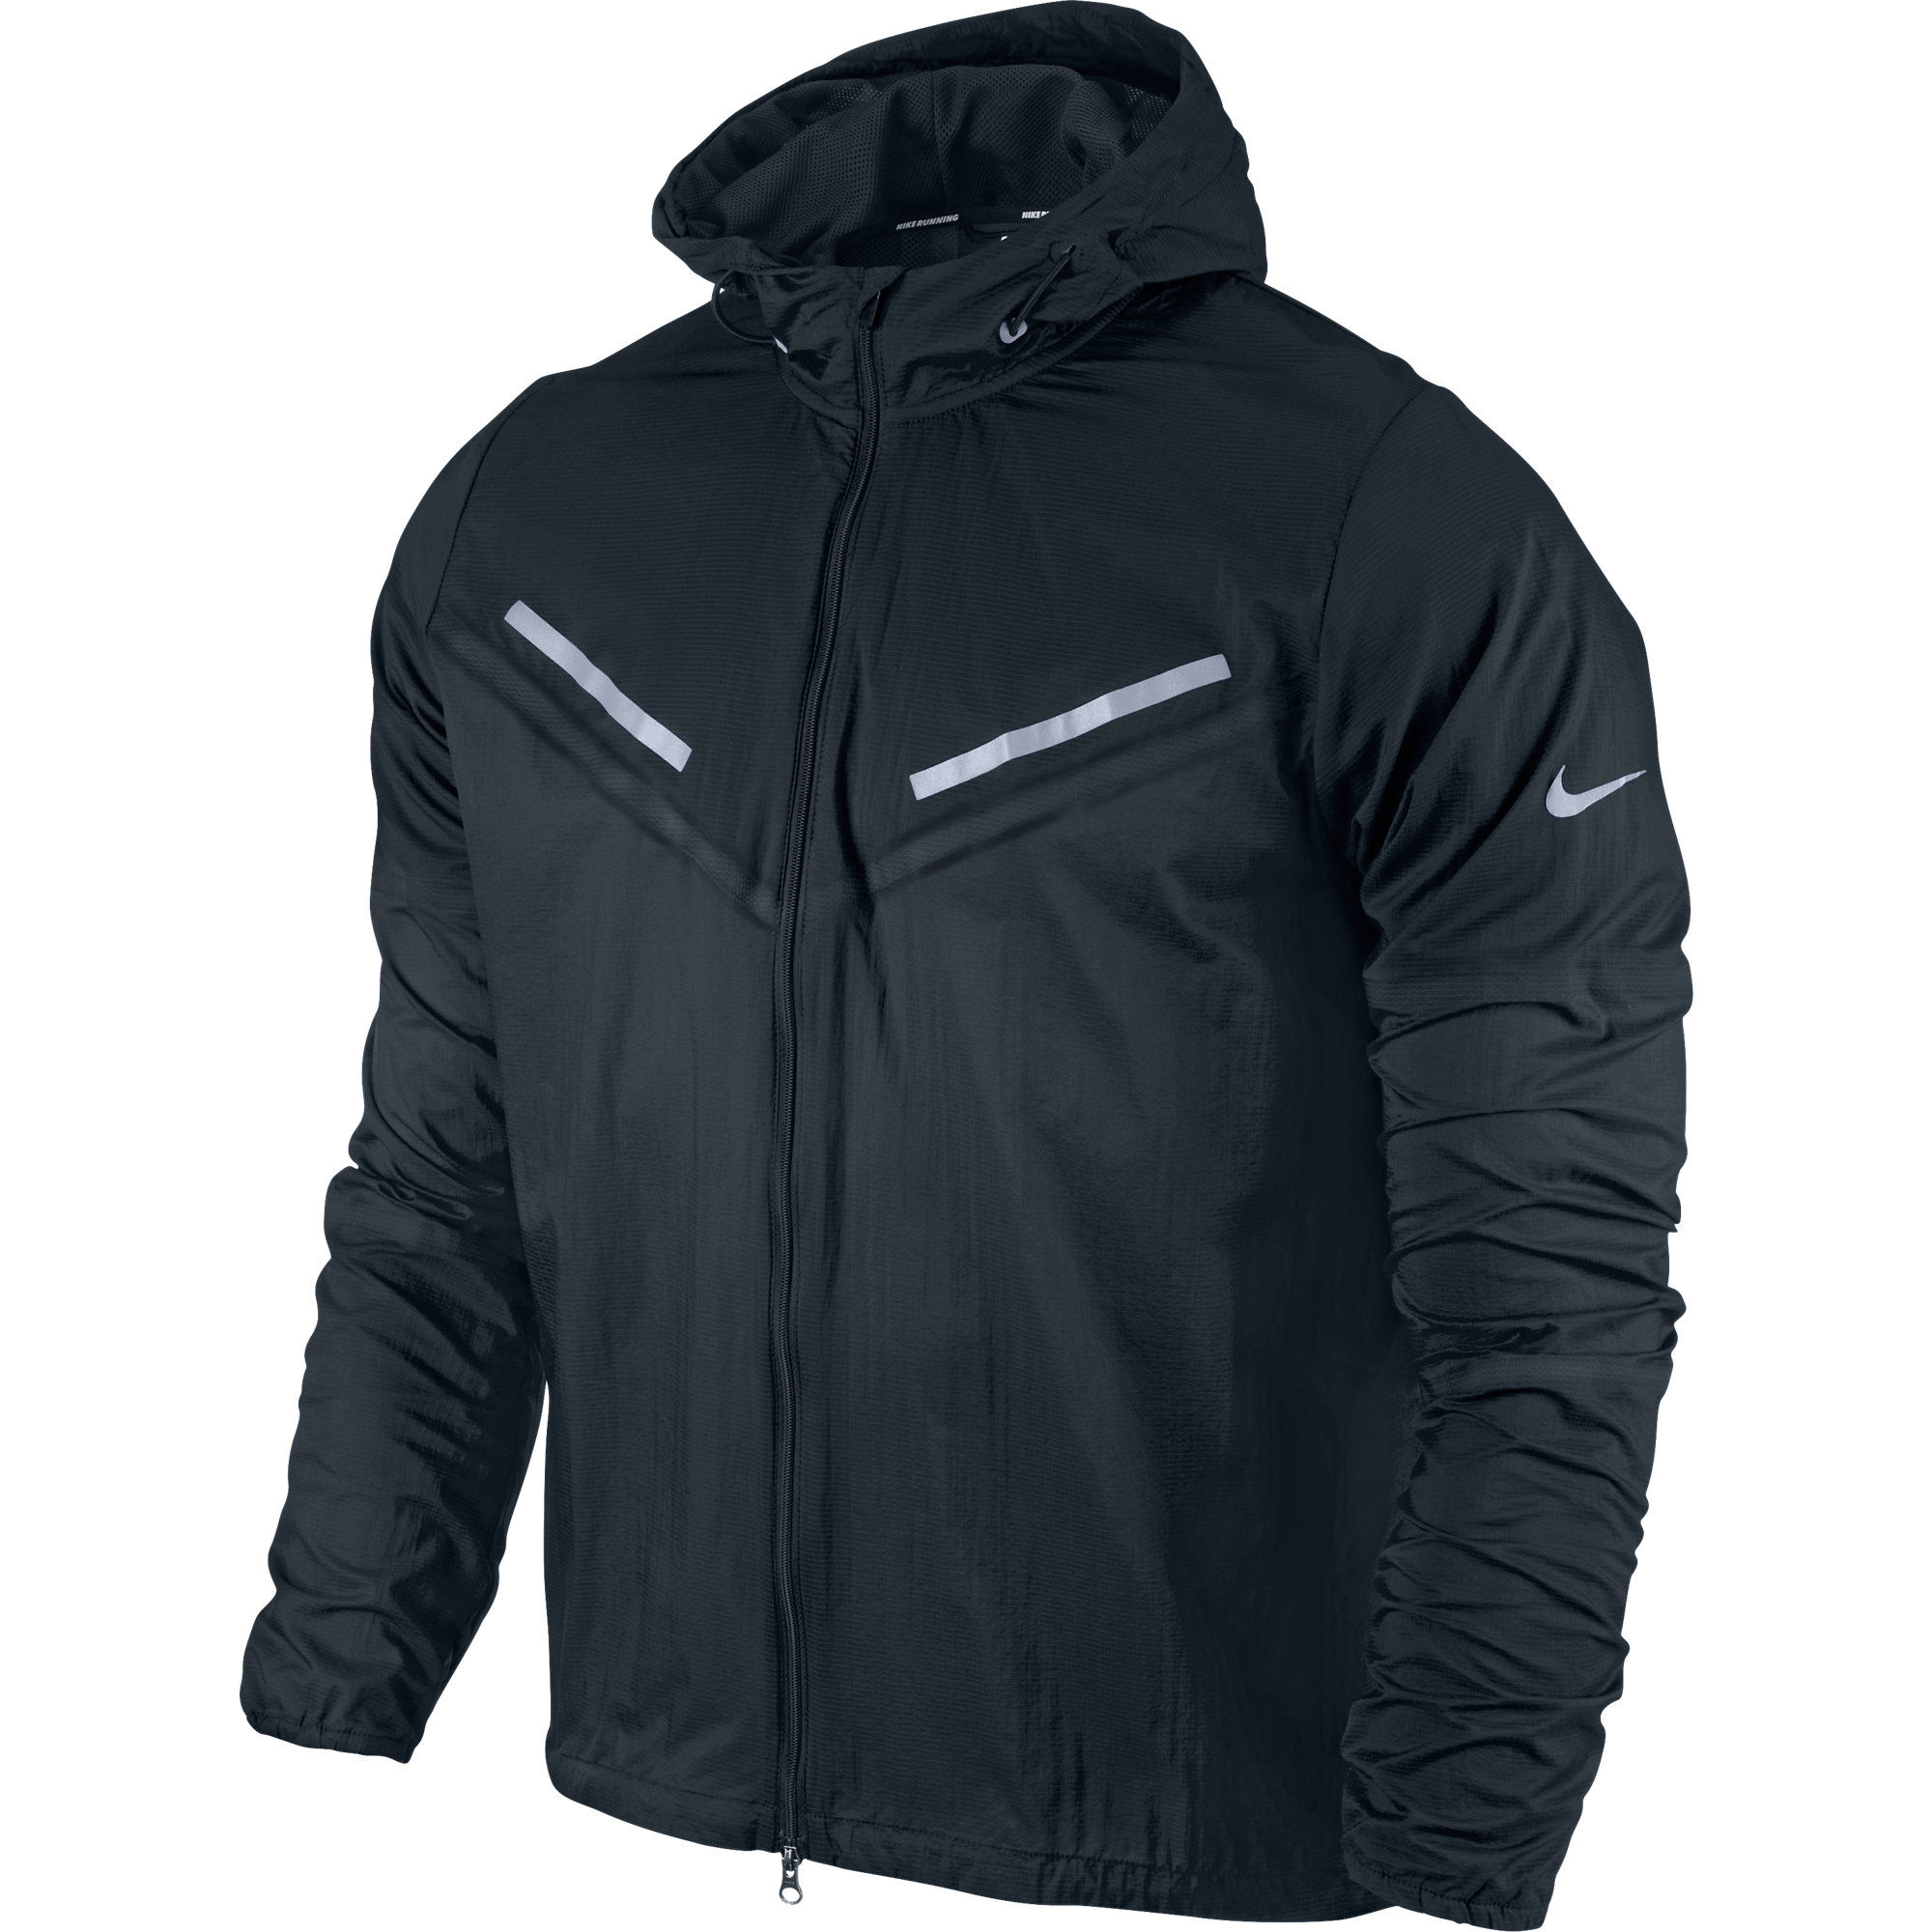 The Nike Cyclone Jacket: Lightweight coverage that's comfortable